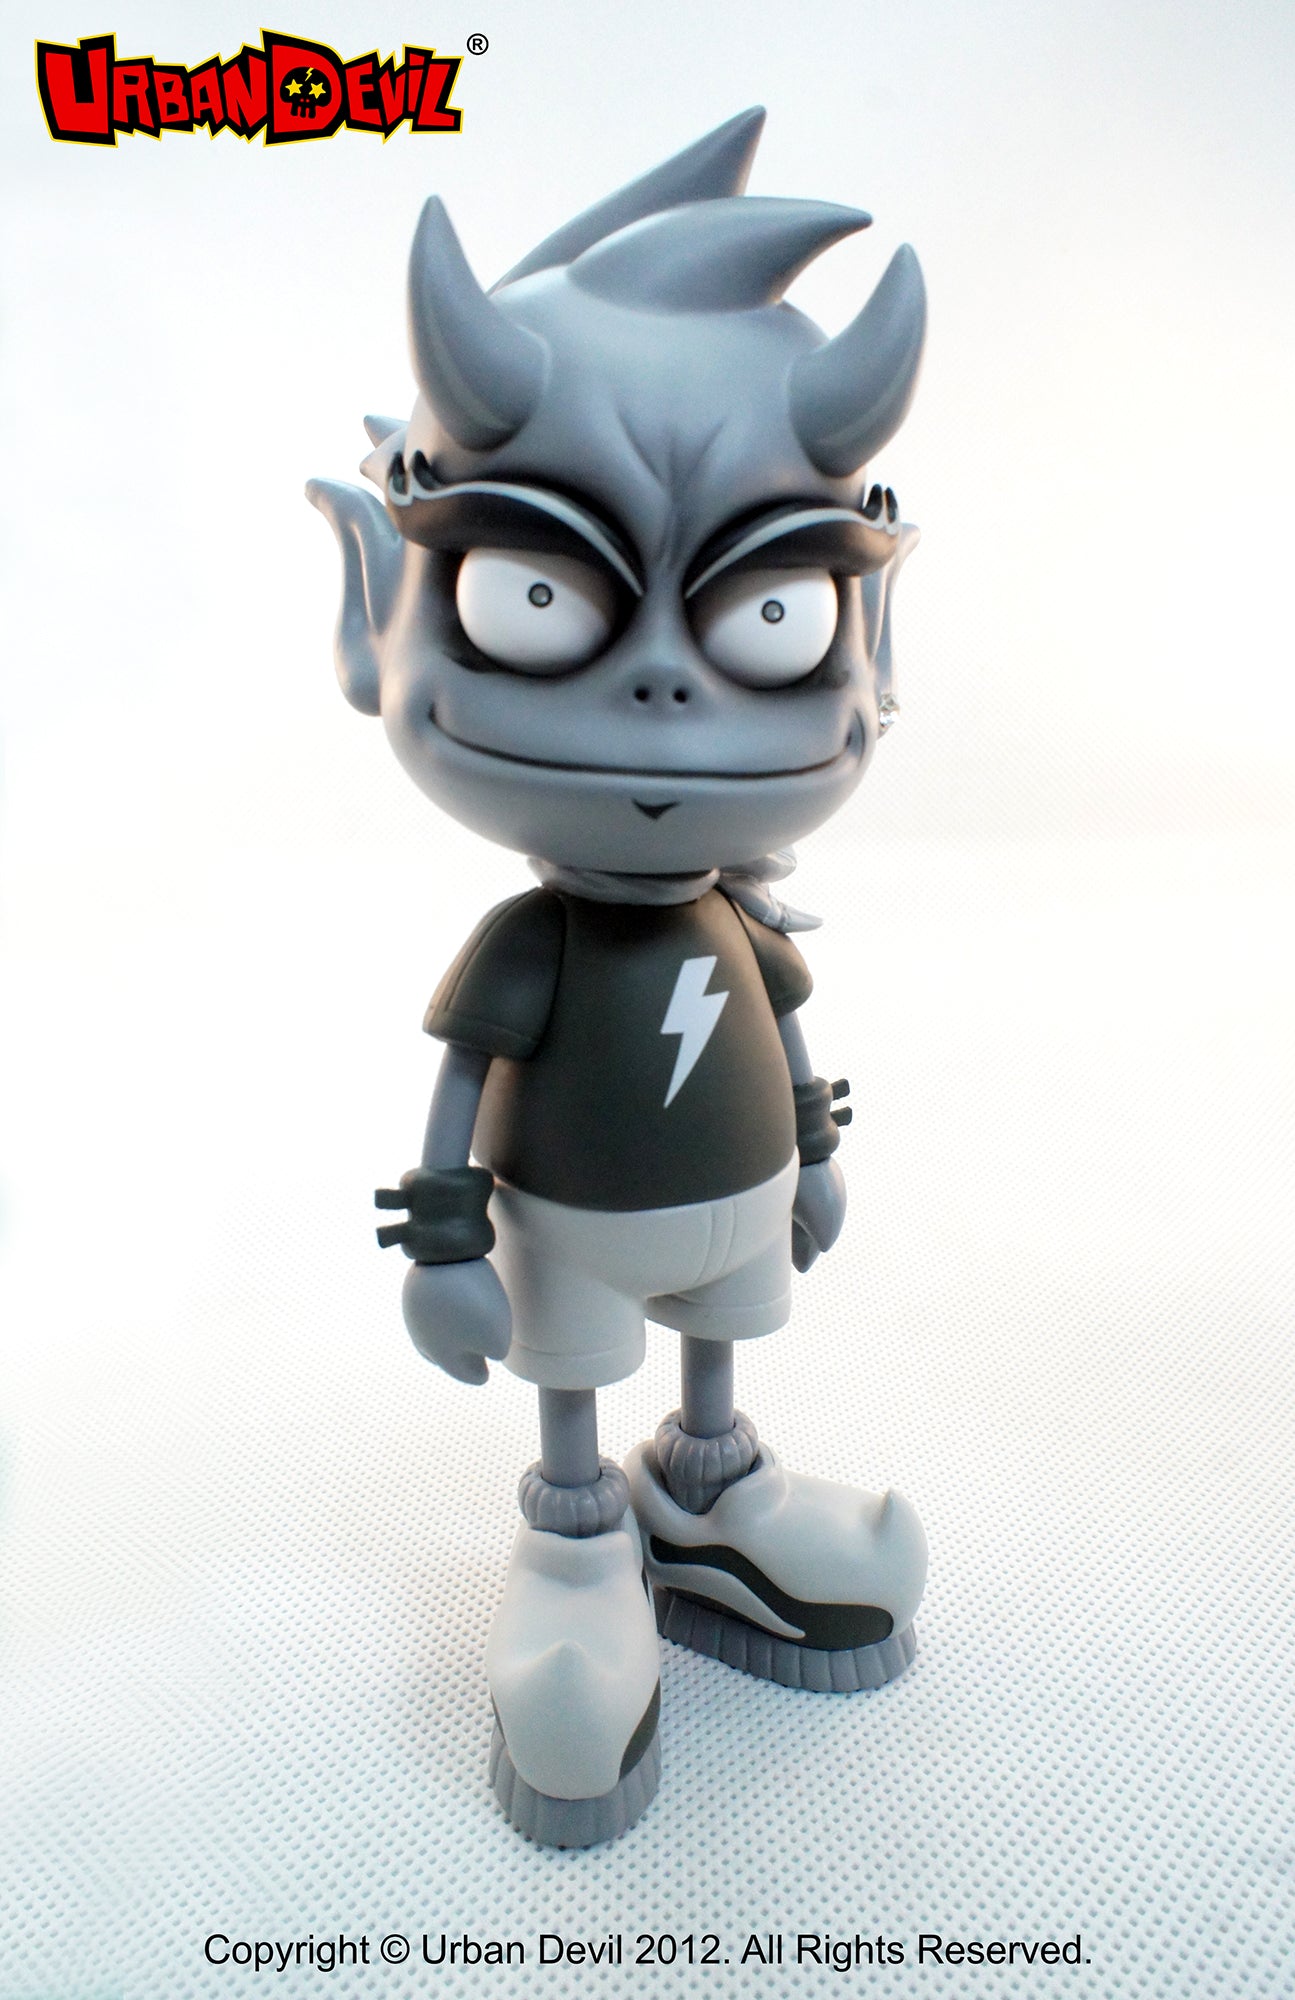 Urban Devil 6-inch figure by PEPPERJERRY - Preorder - RedGuardian Art & Toys